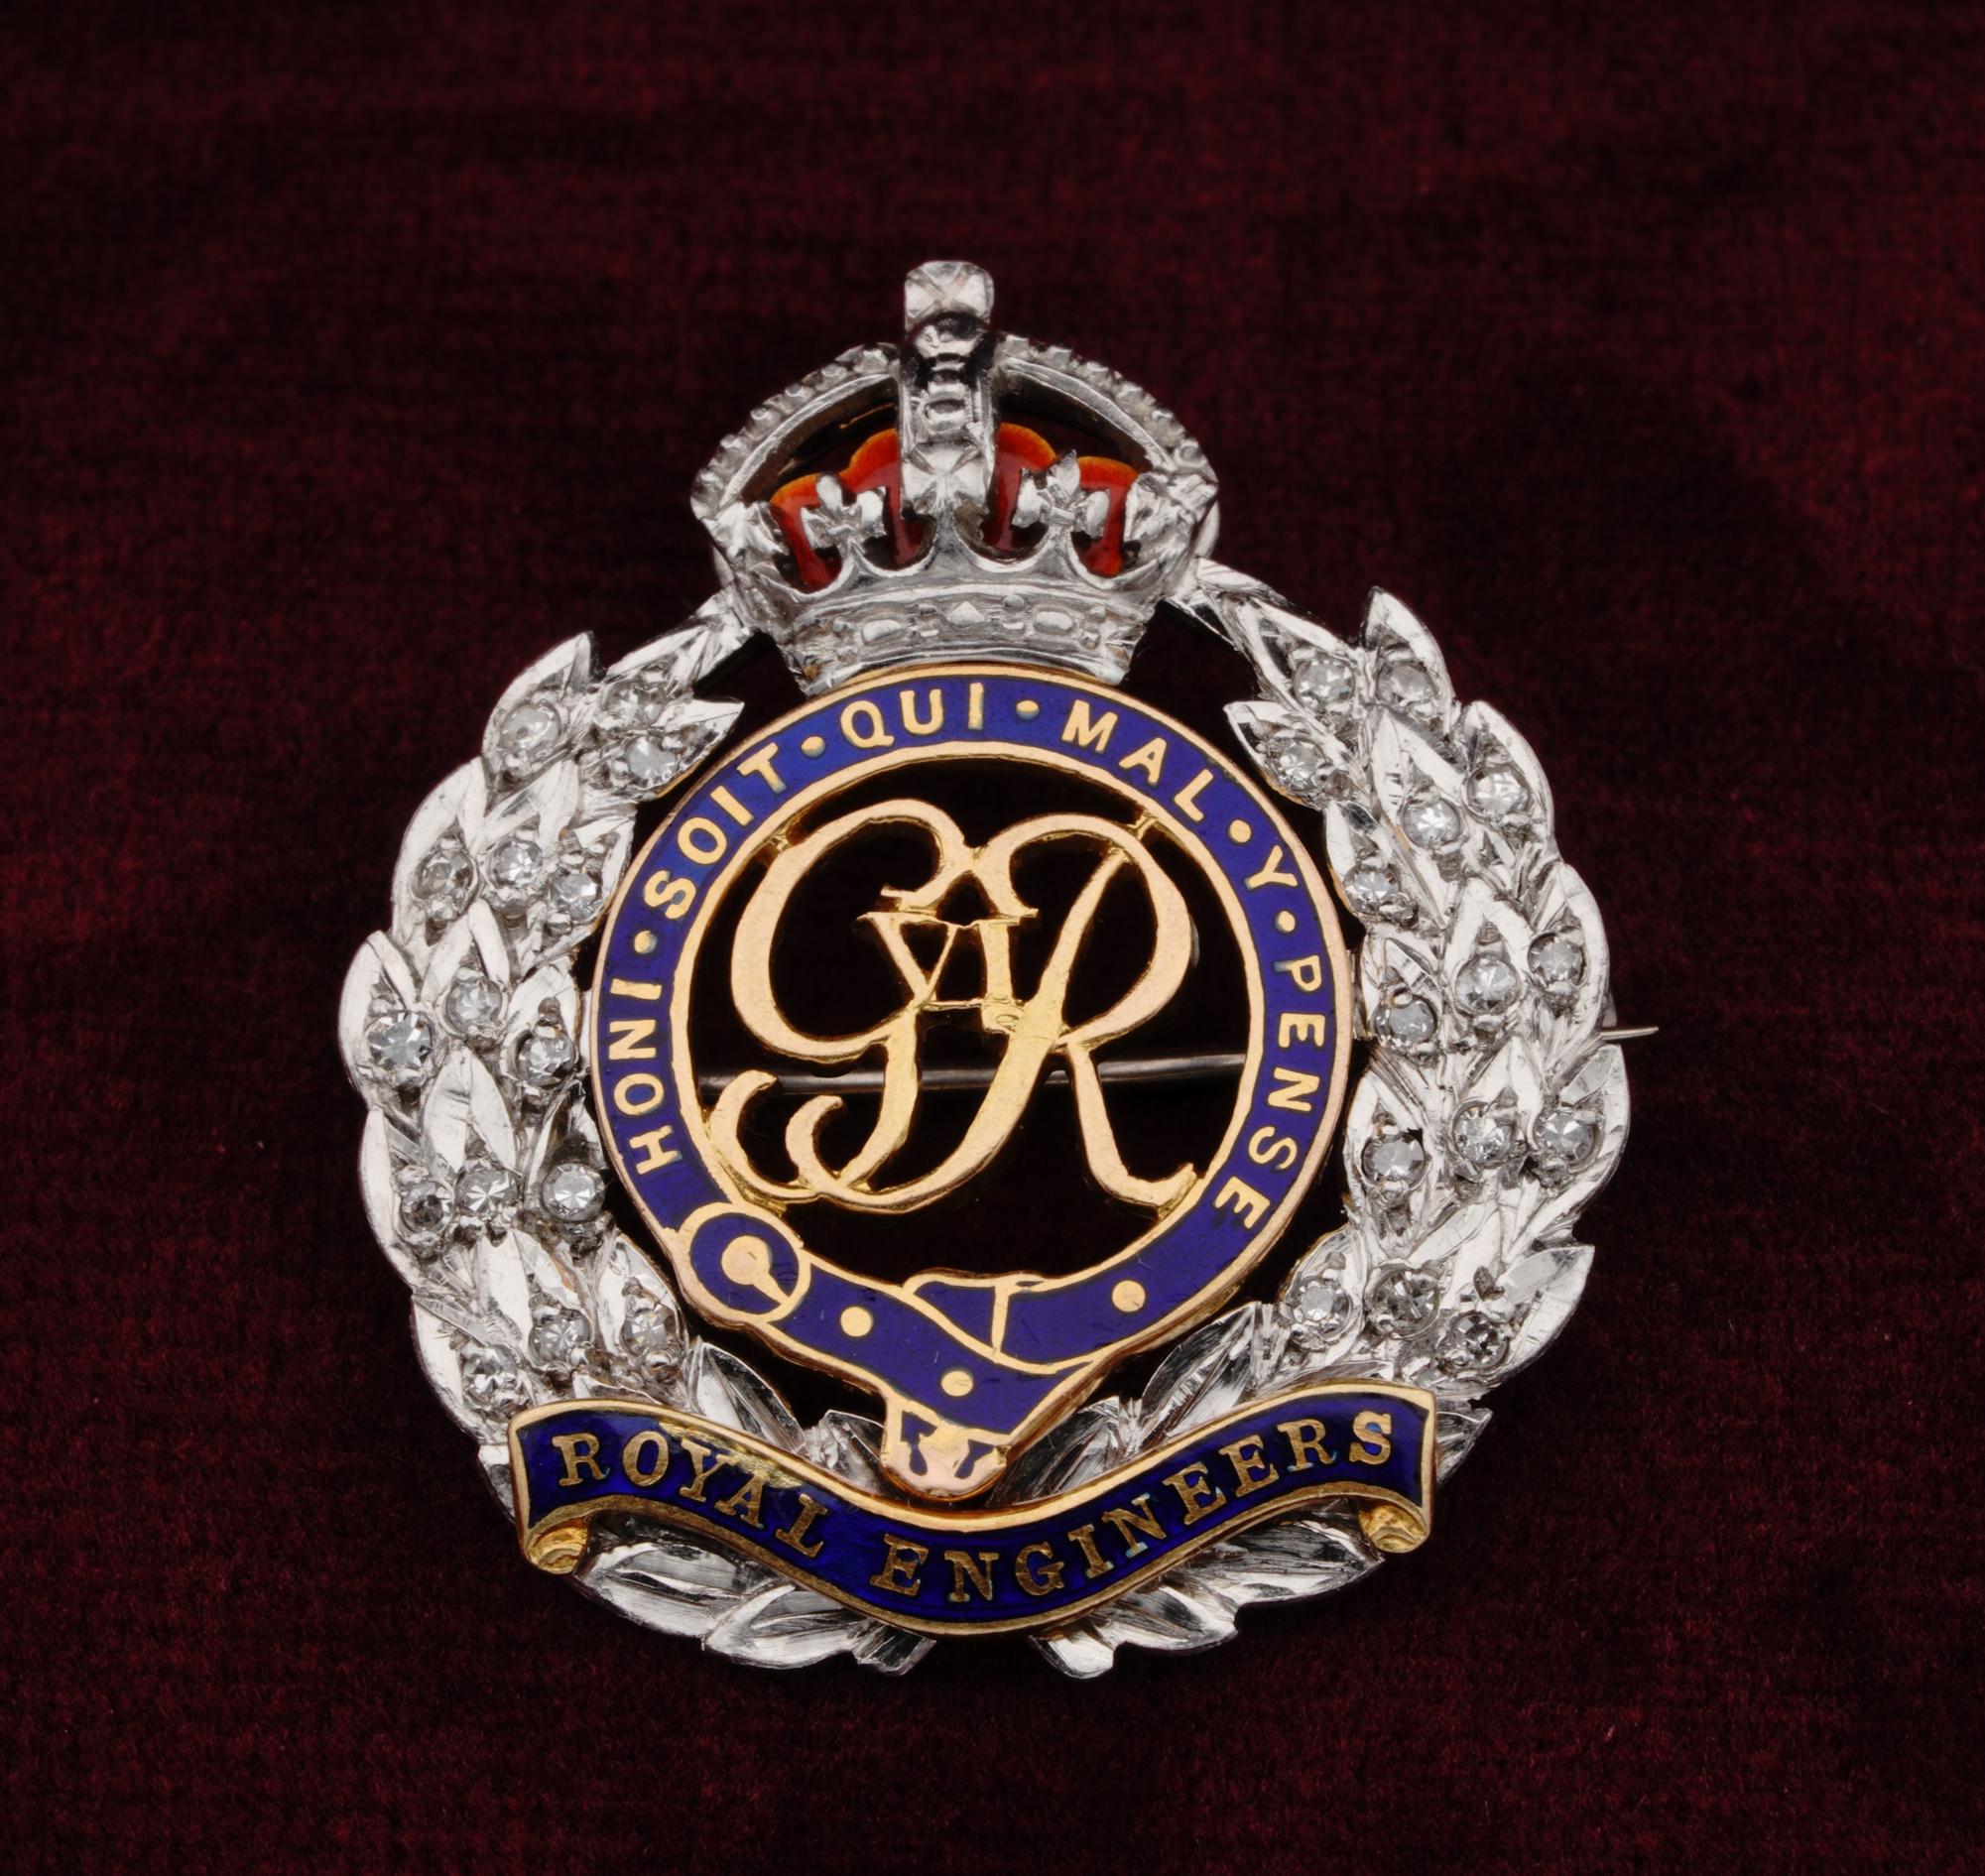 Royal Engineers
Collectable, antique 1920 ca – English
Finely made of Platinum 18 KT gold detailed with Red and Blue enamelling
Embellished with Diamonds approx .30 Ct
Bearing “Honi -Soit -Qui -Mal – Y – Pense – Royal Engineers” motto
Measures : 29